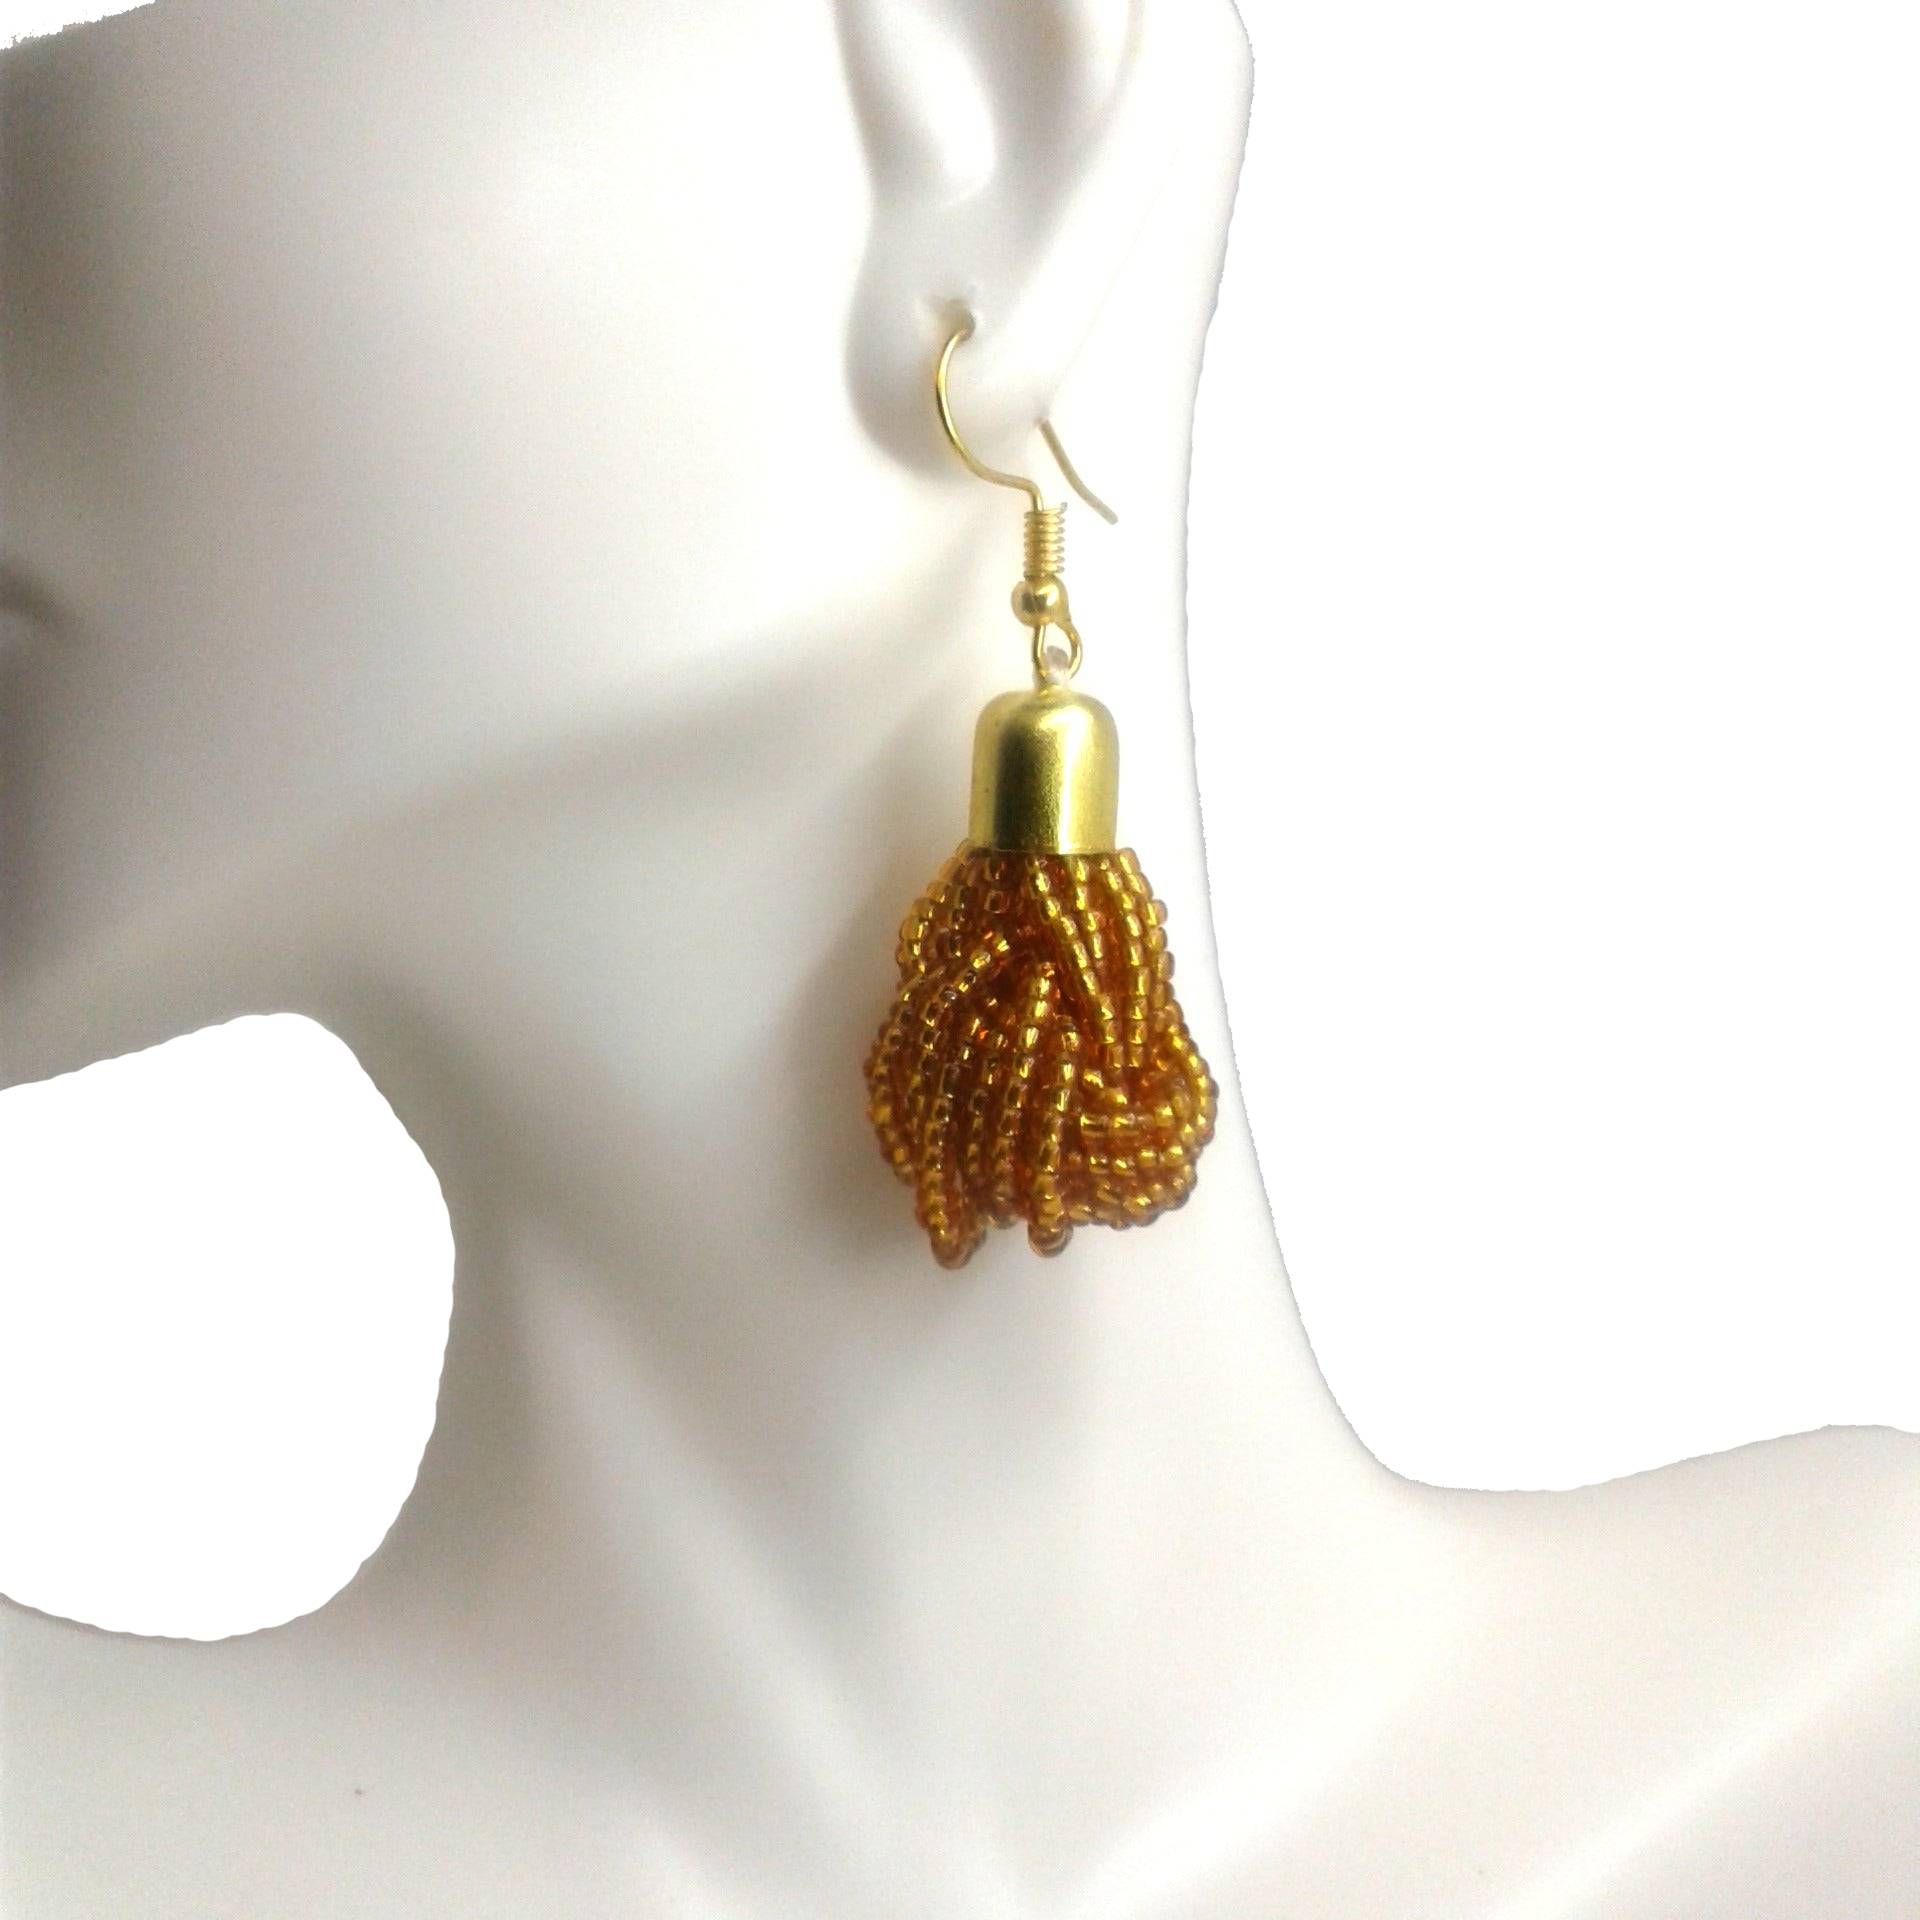 Small Dangle Earrings handmade with brown beads and gold plated brass